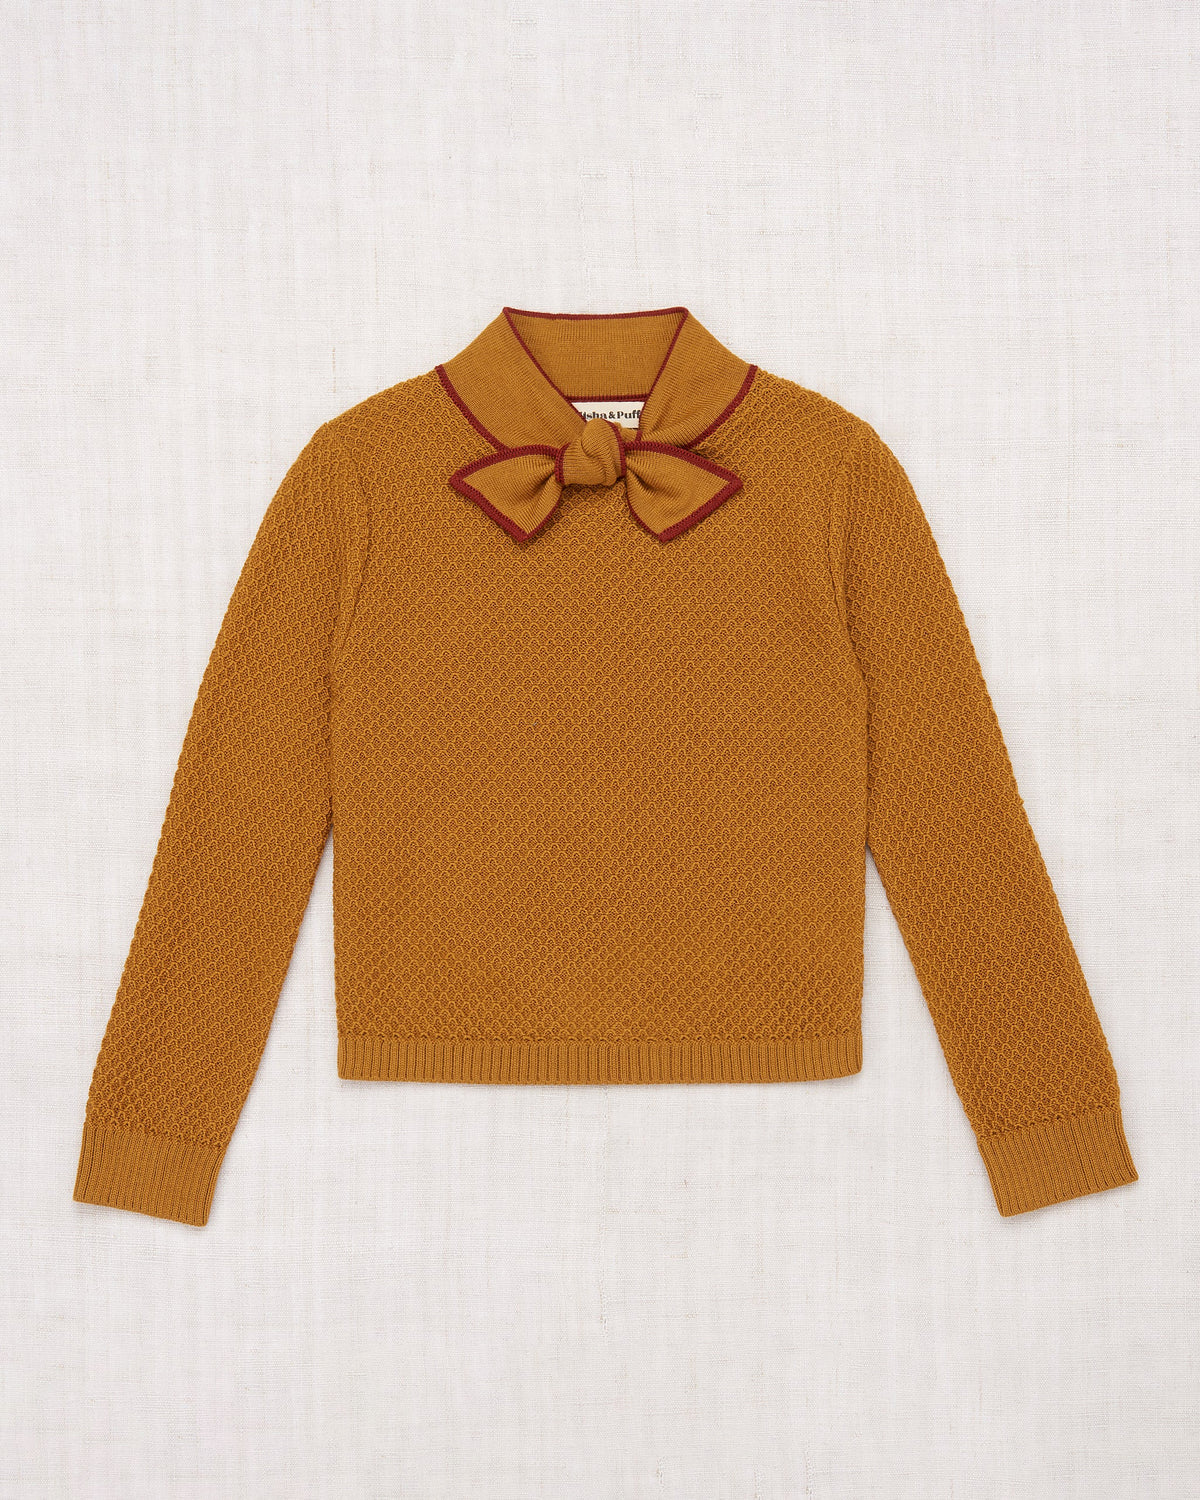 Bow Scout Sweater